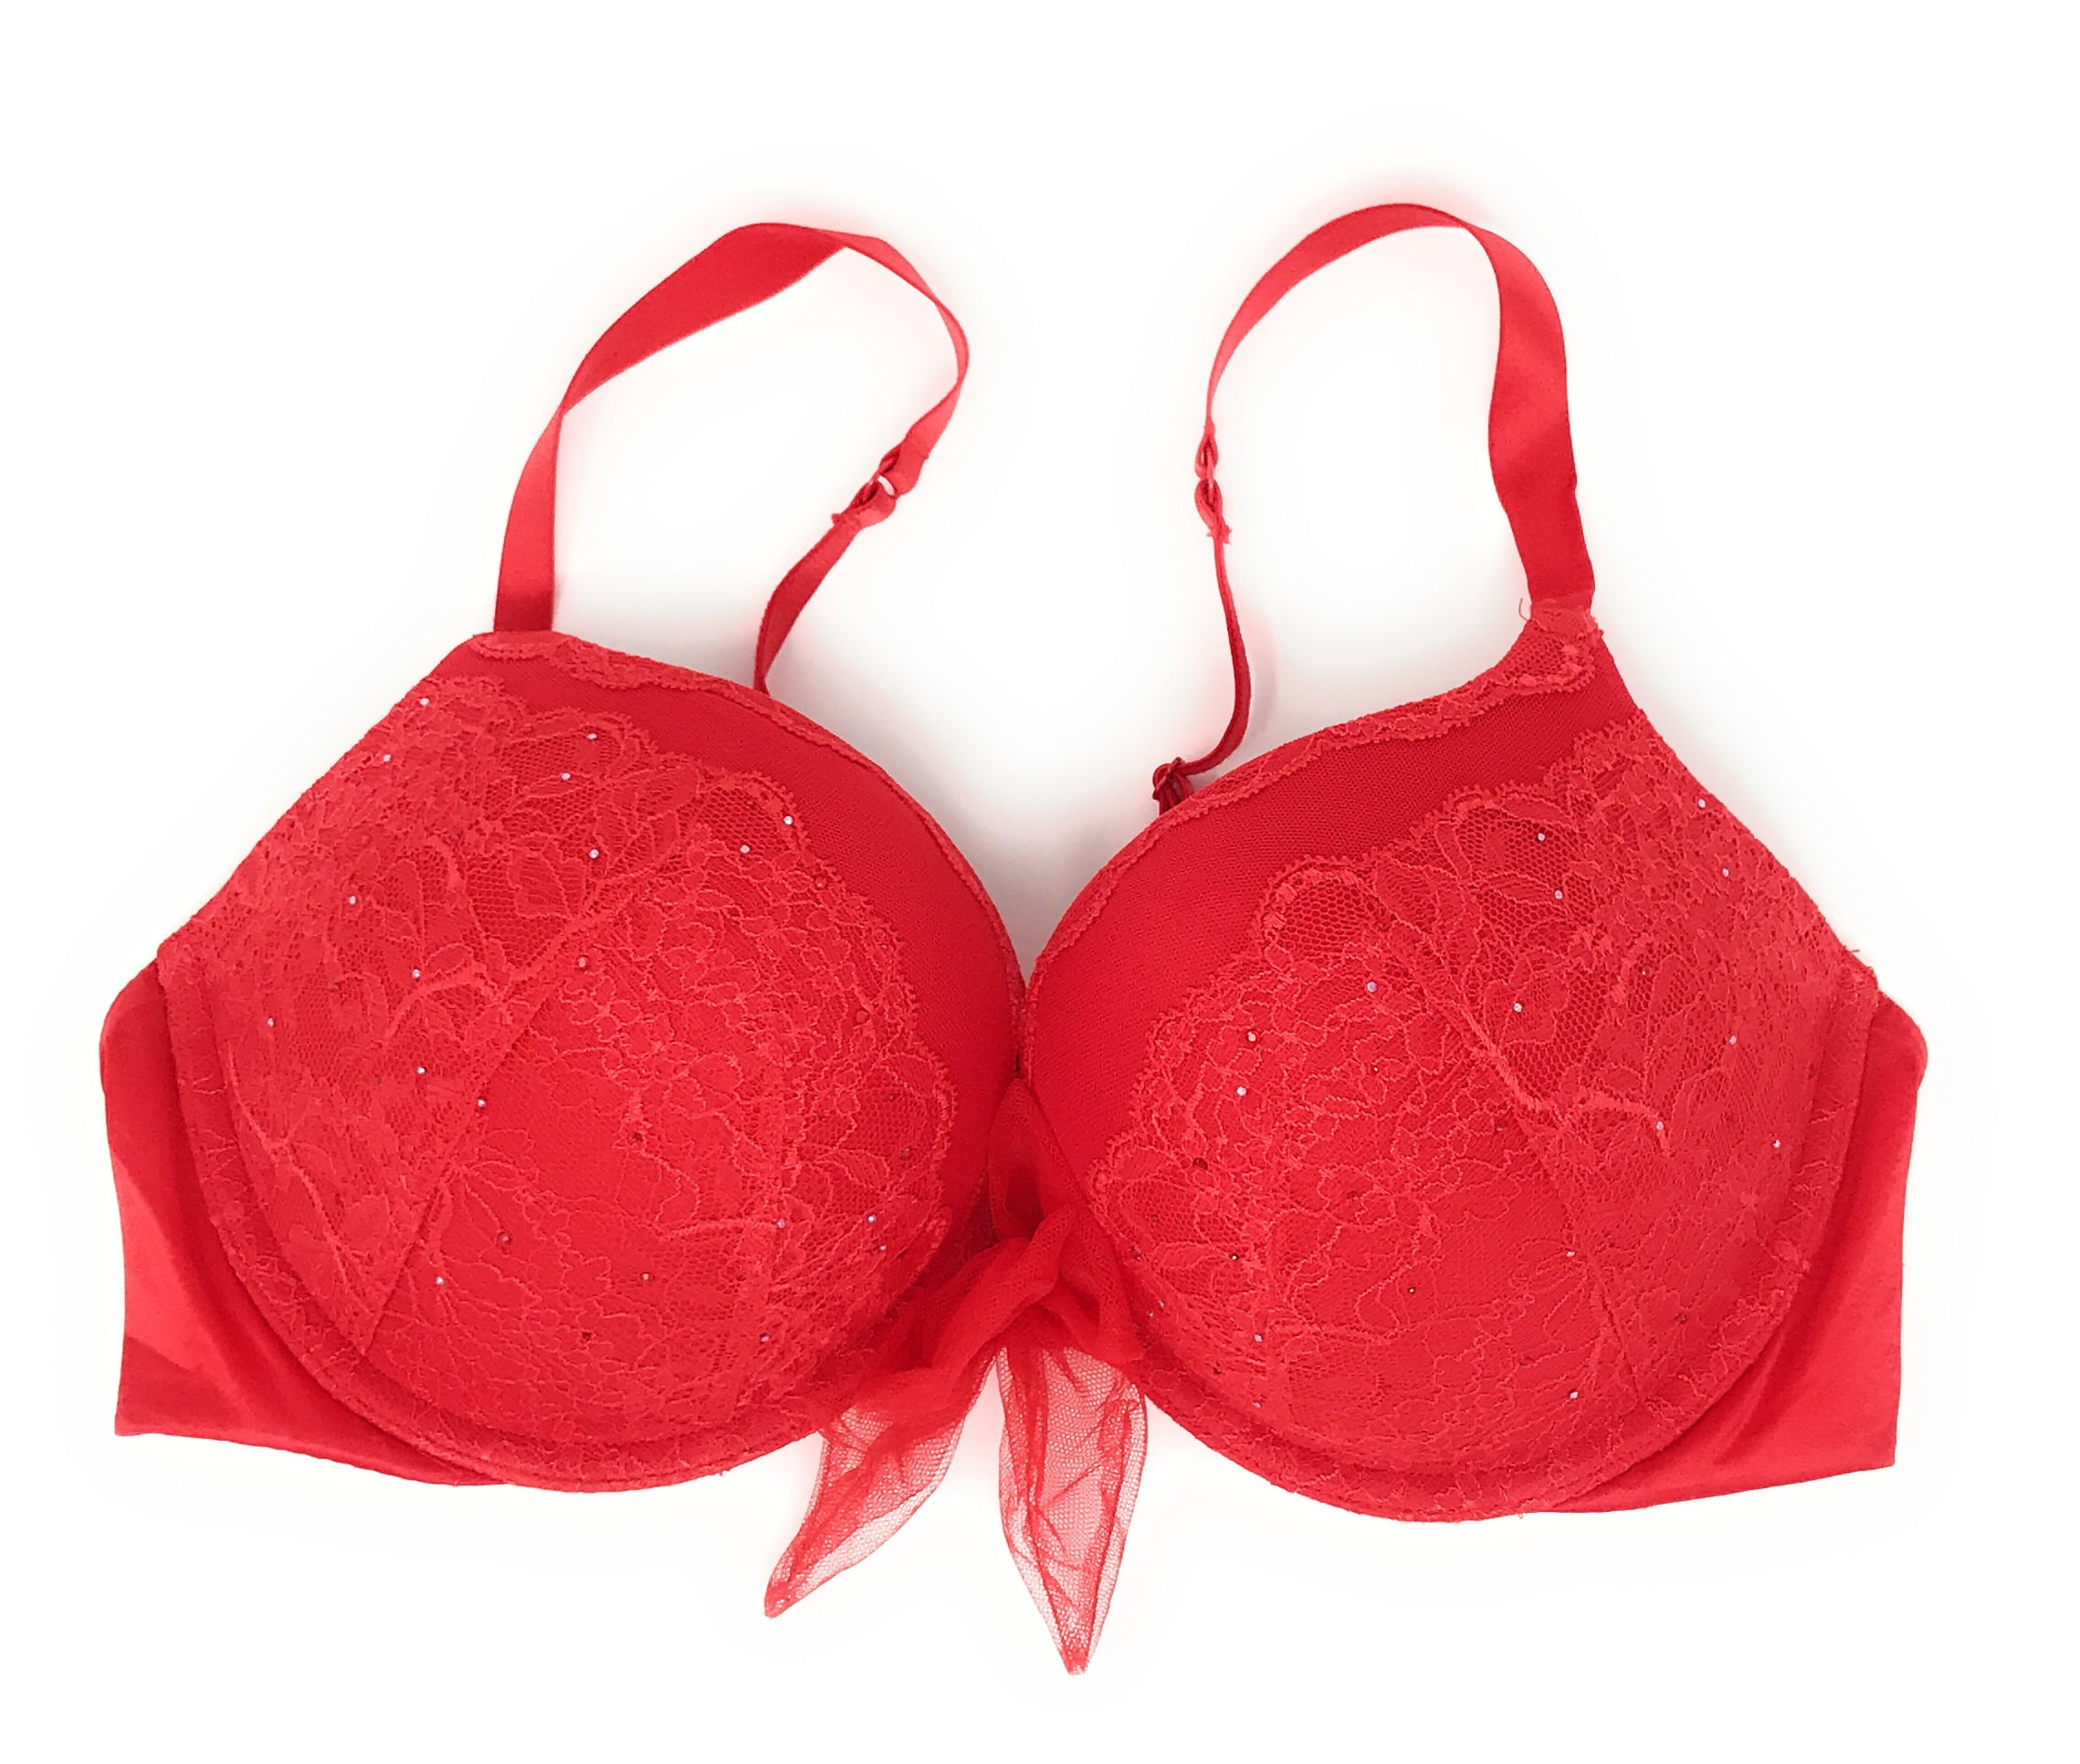 Victoria's Secret Bombshell add 2 cups lace Push Up Hungary